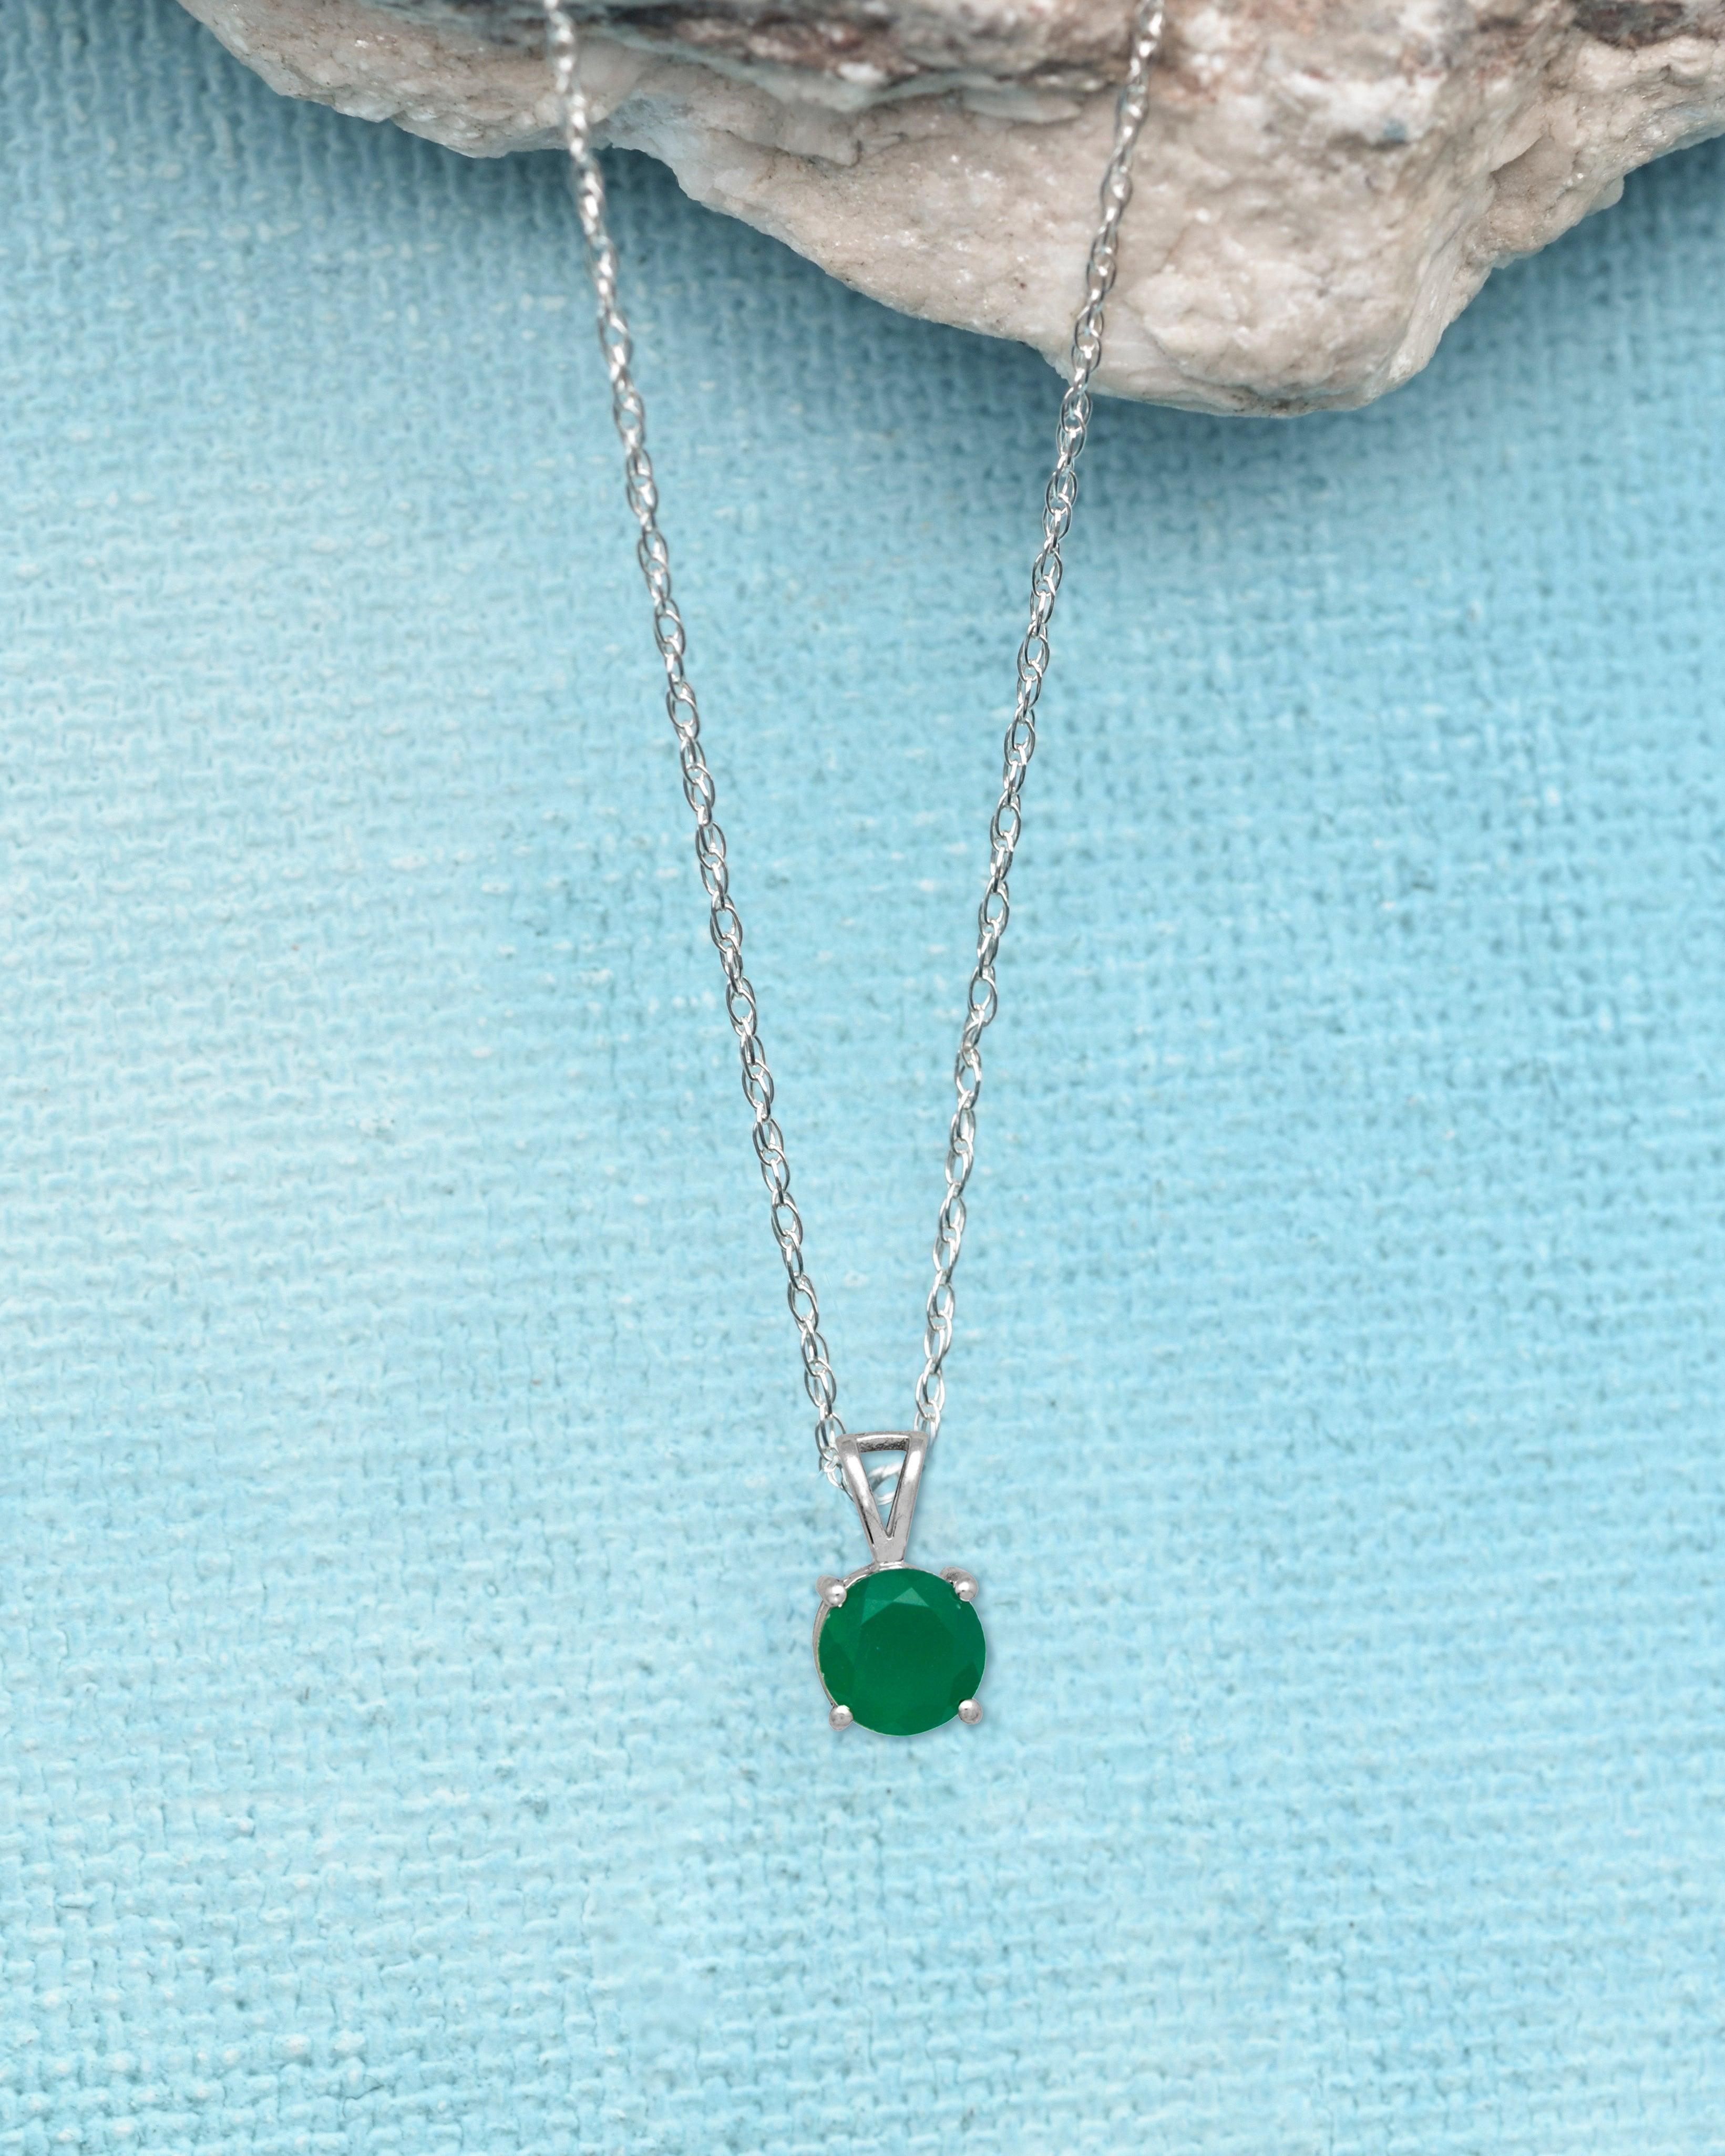 3/4" Green Onyx 925 Solid Sterling Silver Pendant Necklace With Chain - YoTreasure